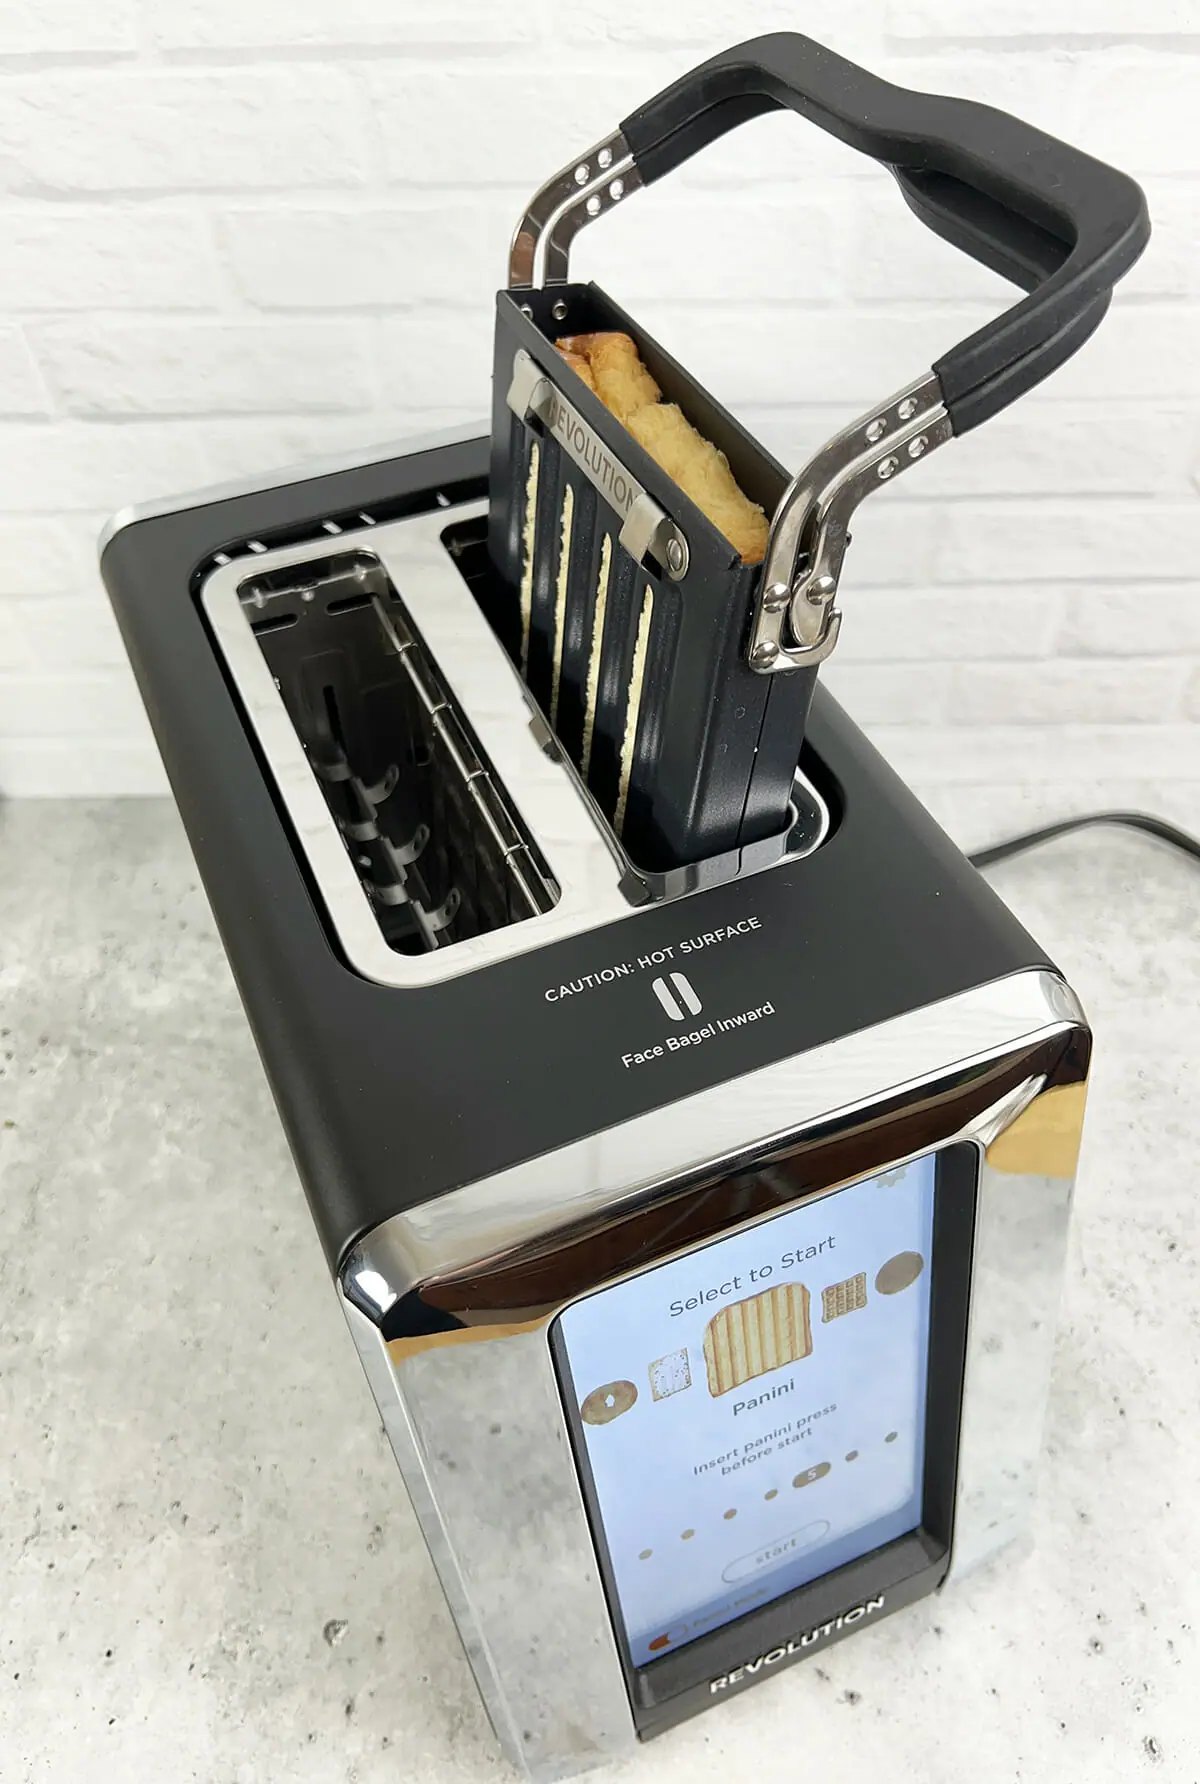 We take a close look at the Revolution 180 Toaster for this in depth review.